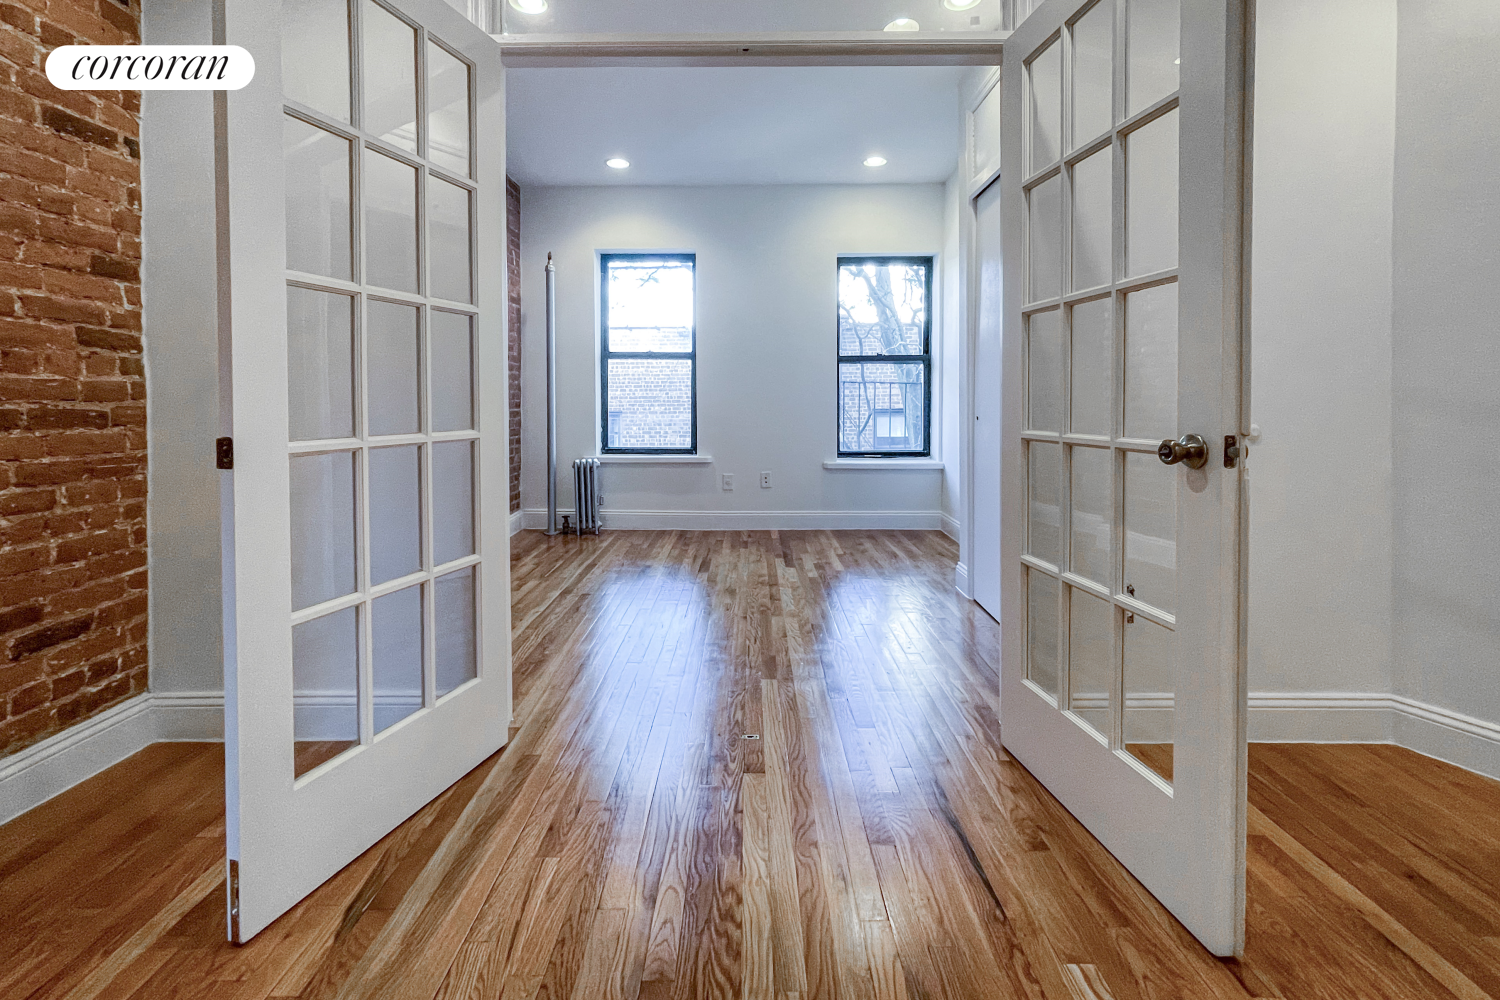 423 East 81st Street 5Rw, Yorkville, Upper East Side, NYC - 1 Bedrooms  
1 Bathrooms  
3 Rooms - 